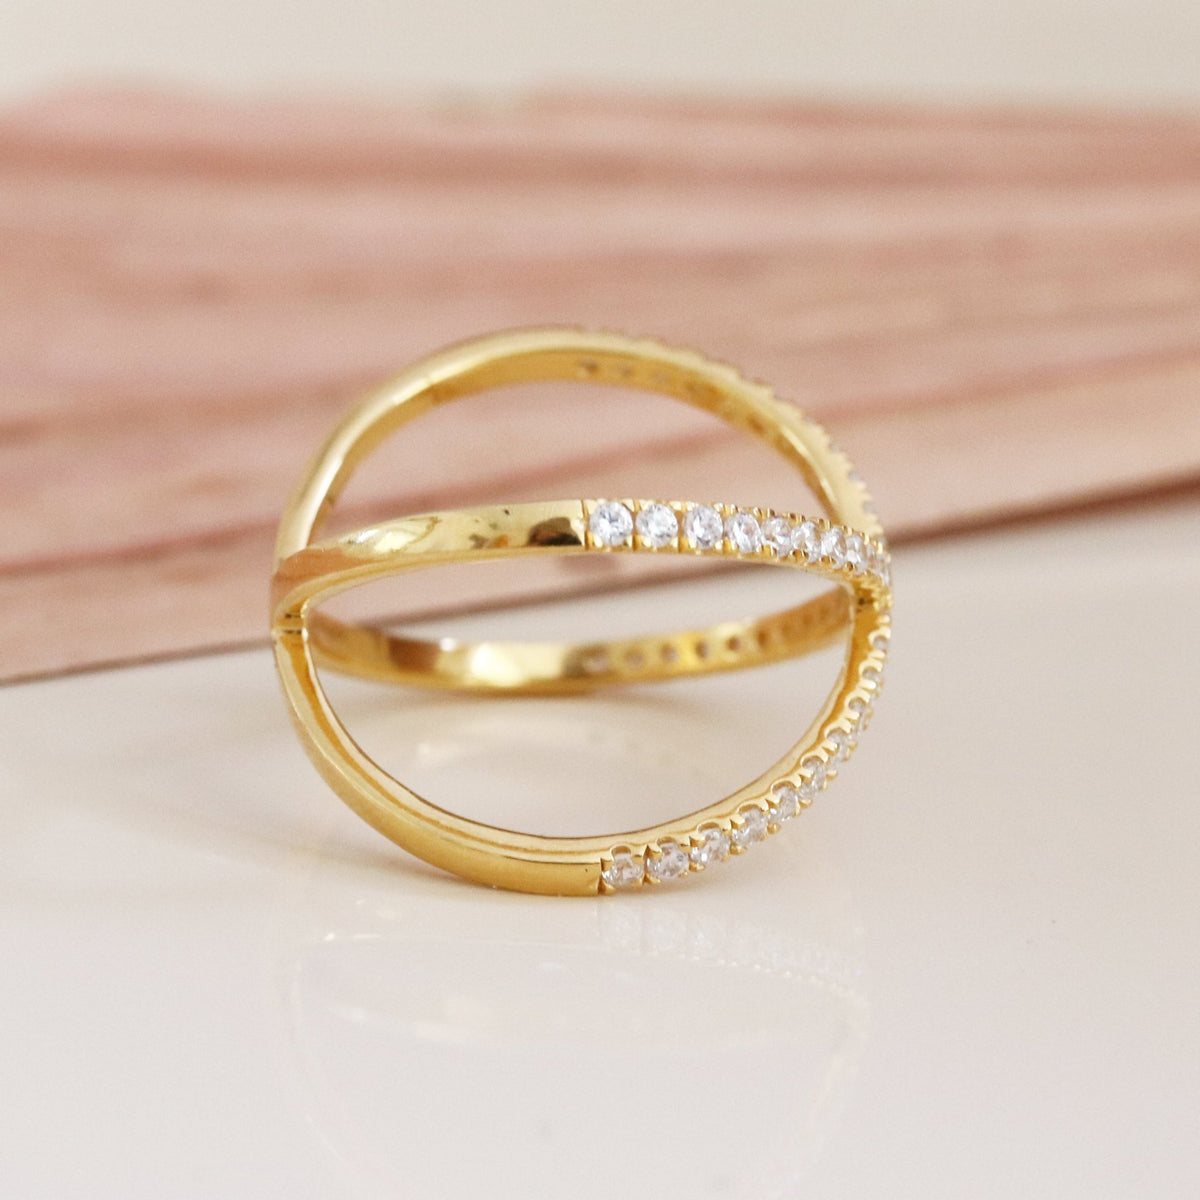 STAR CROSSED LOVE BAR RING - CUBIC ZIRCONIA &amp; GOLD - SO PRETTY CARA COTTER